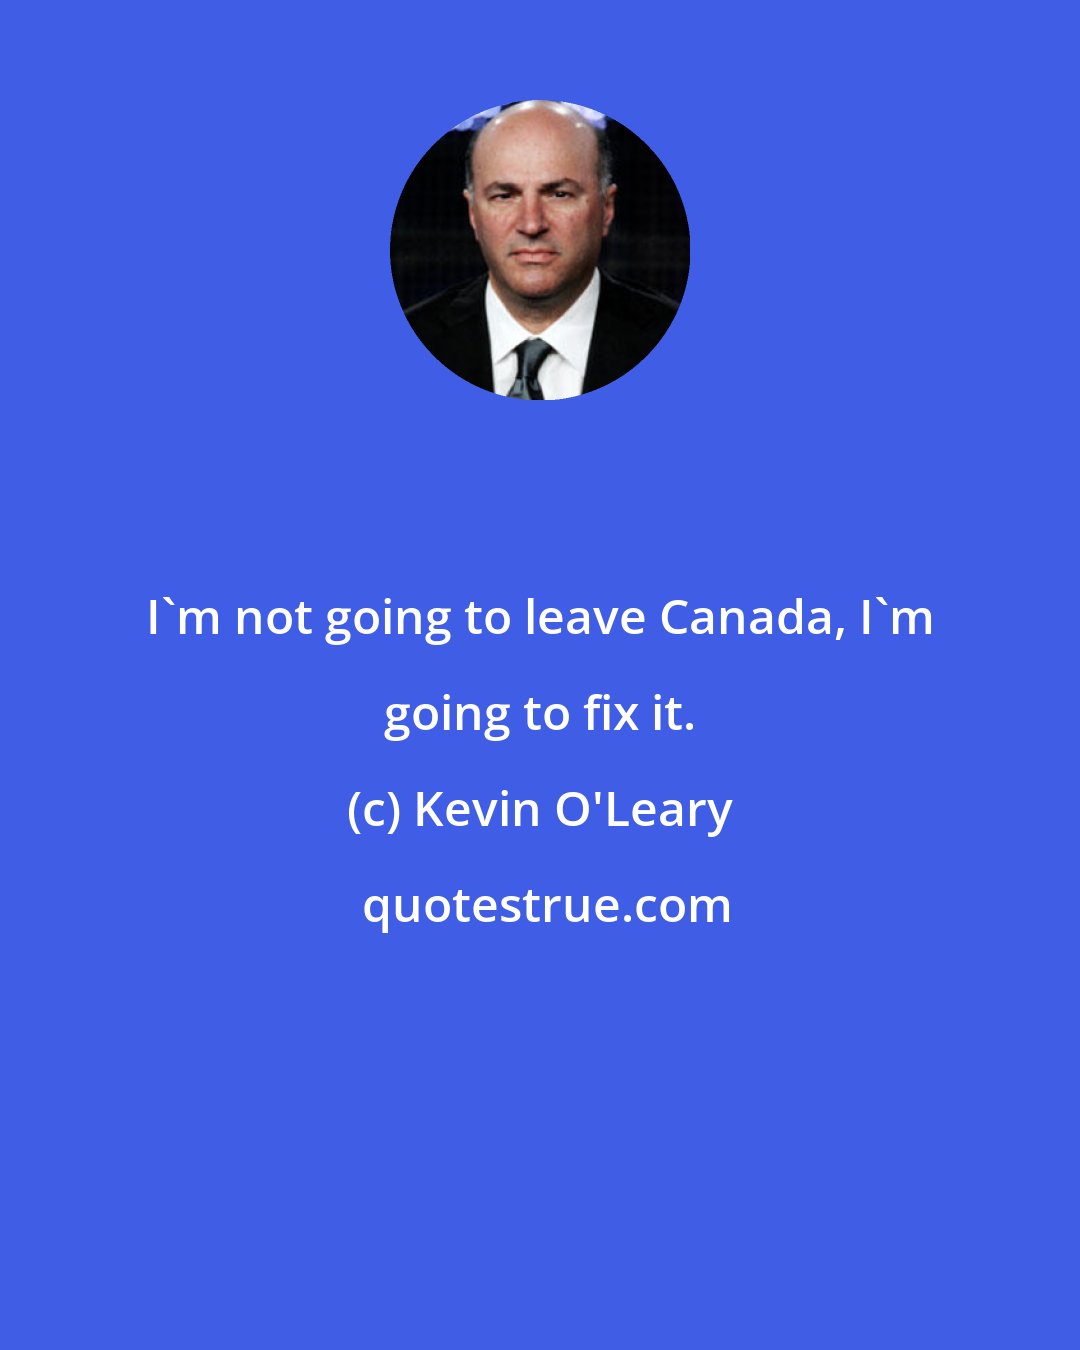 Kevin O'Leary: I'm not going to leave Canada, I'm going to fix it.